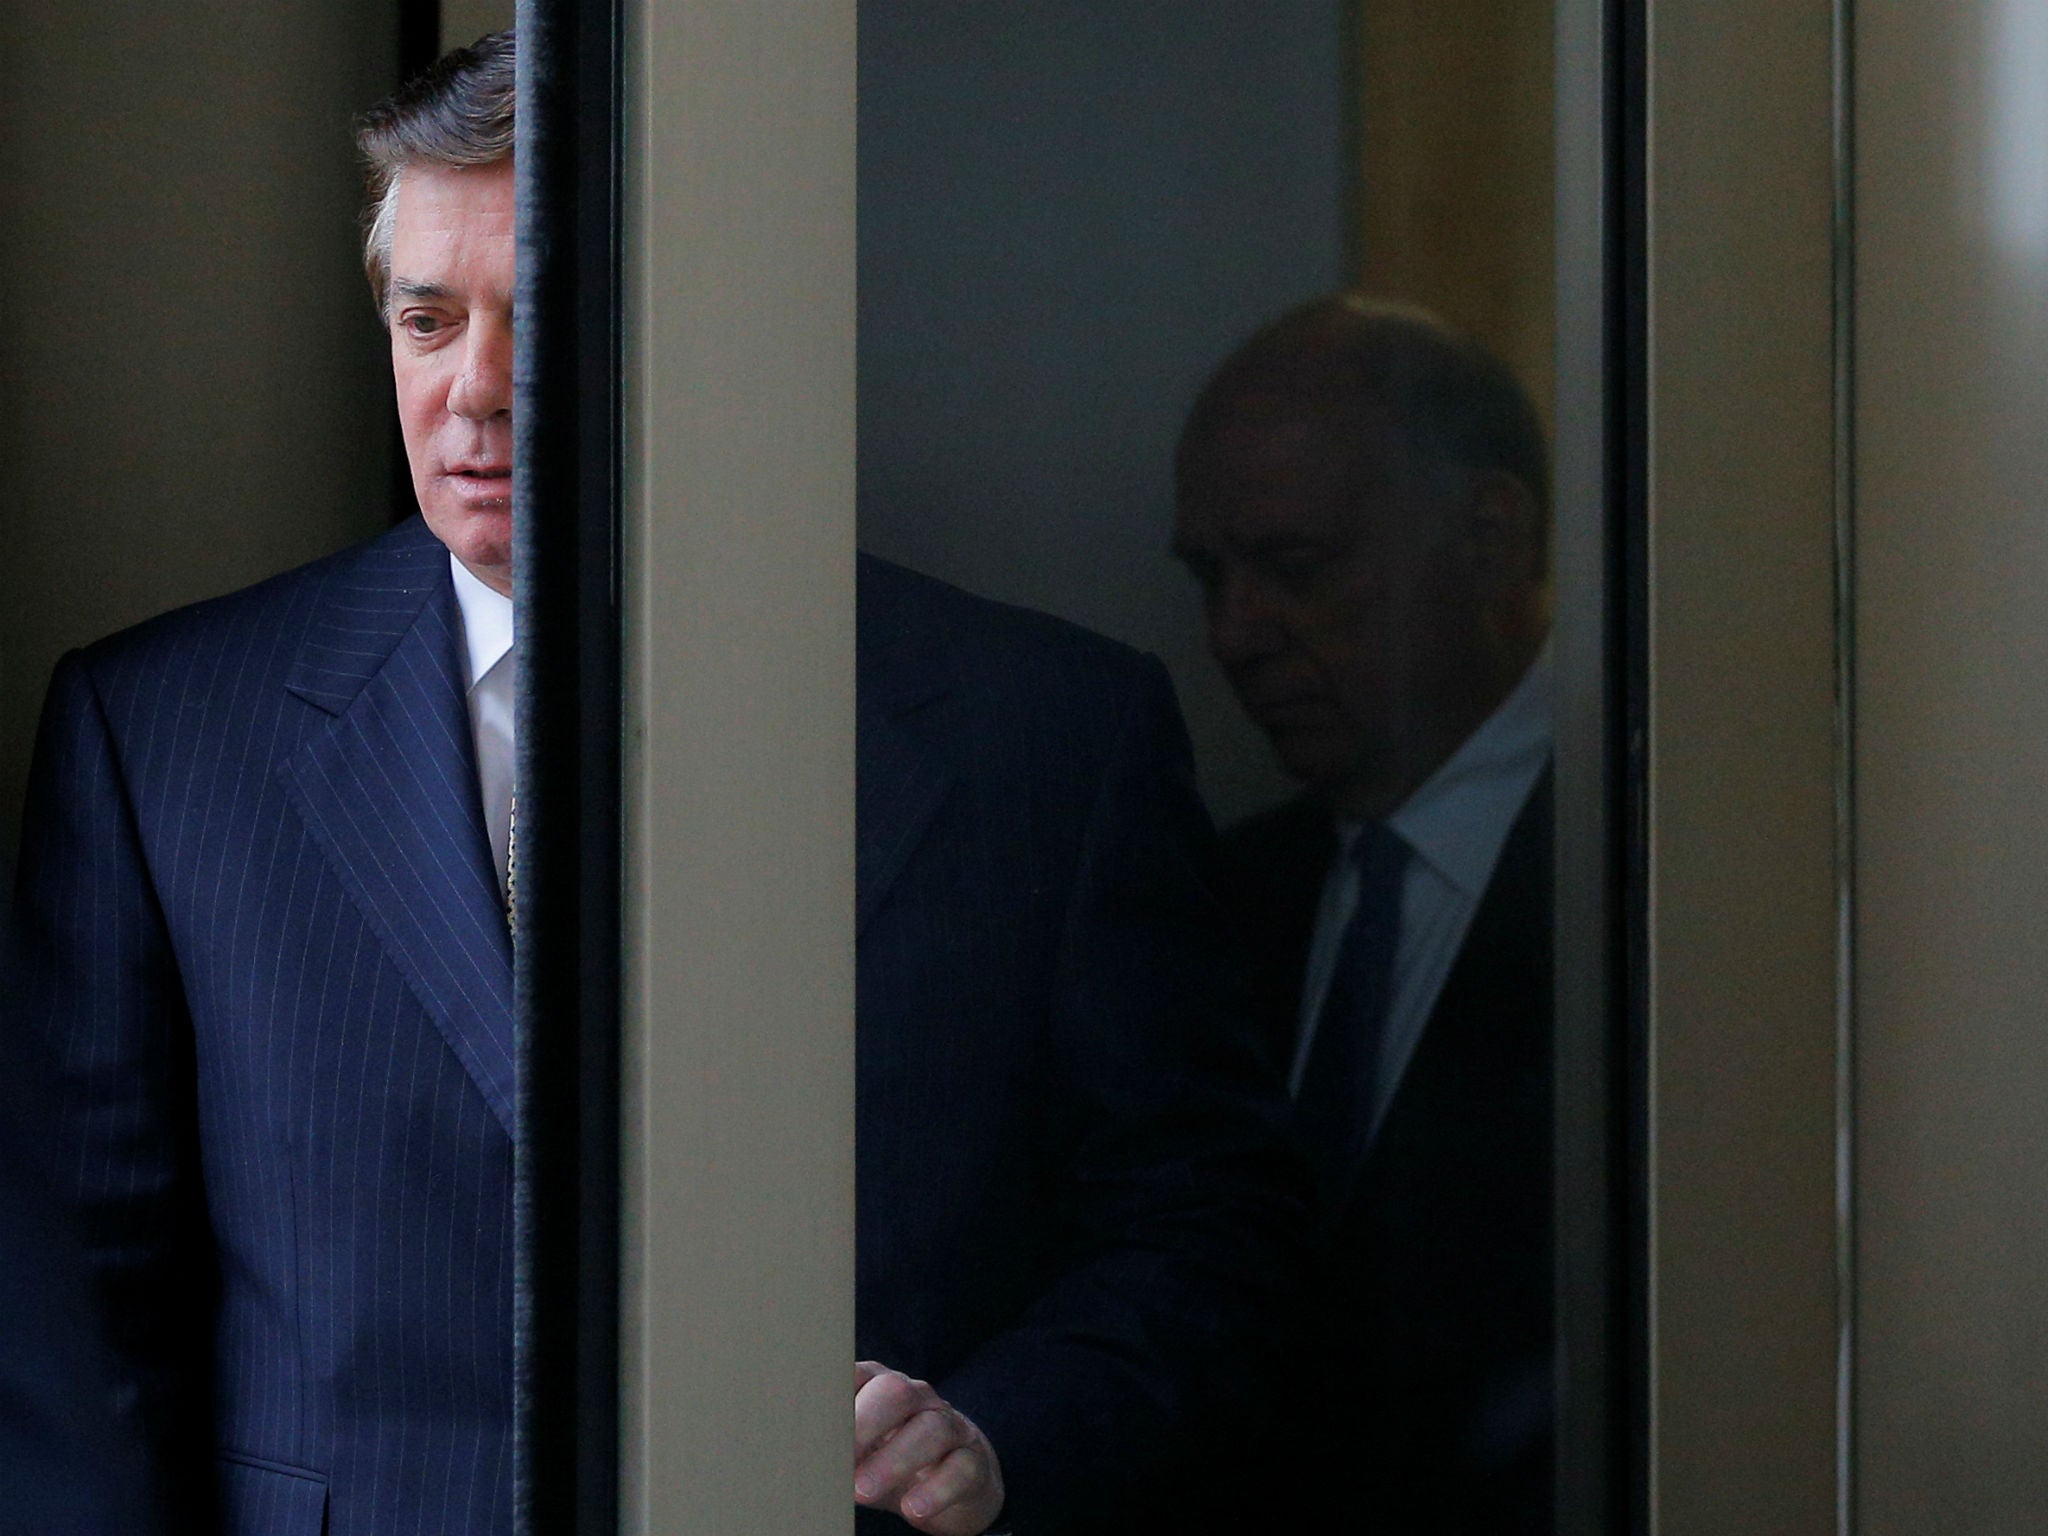 Paul Manafort departs after a hearing in Washington, DC